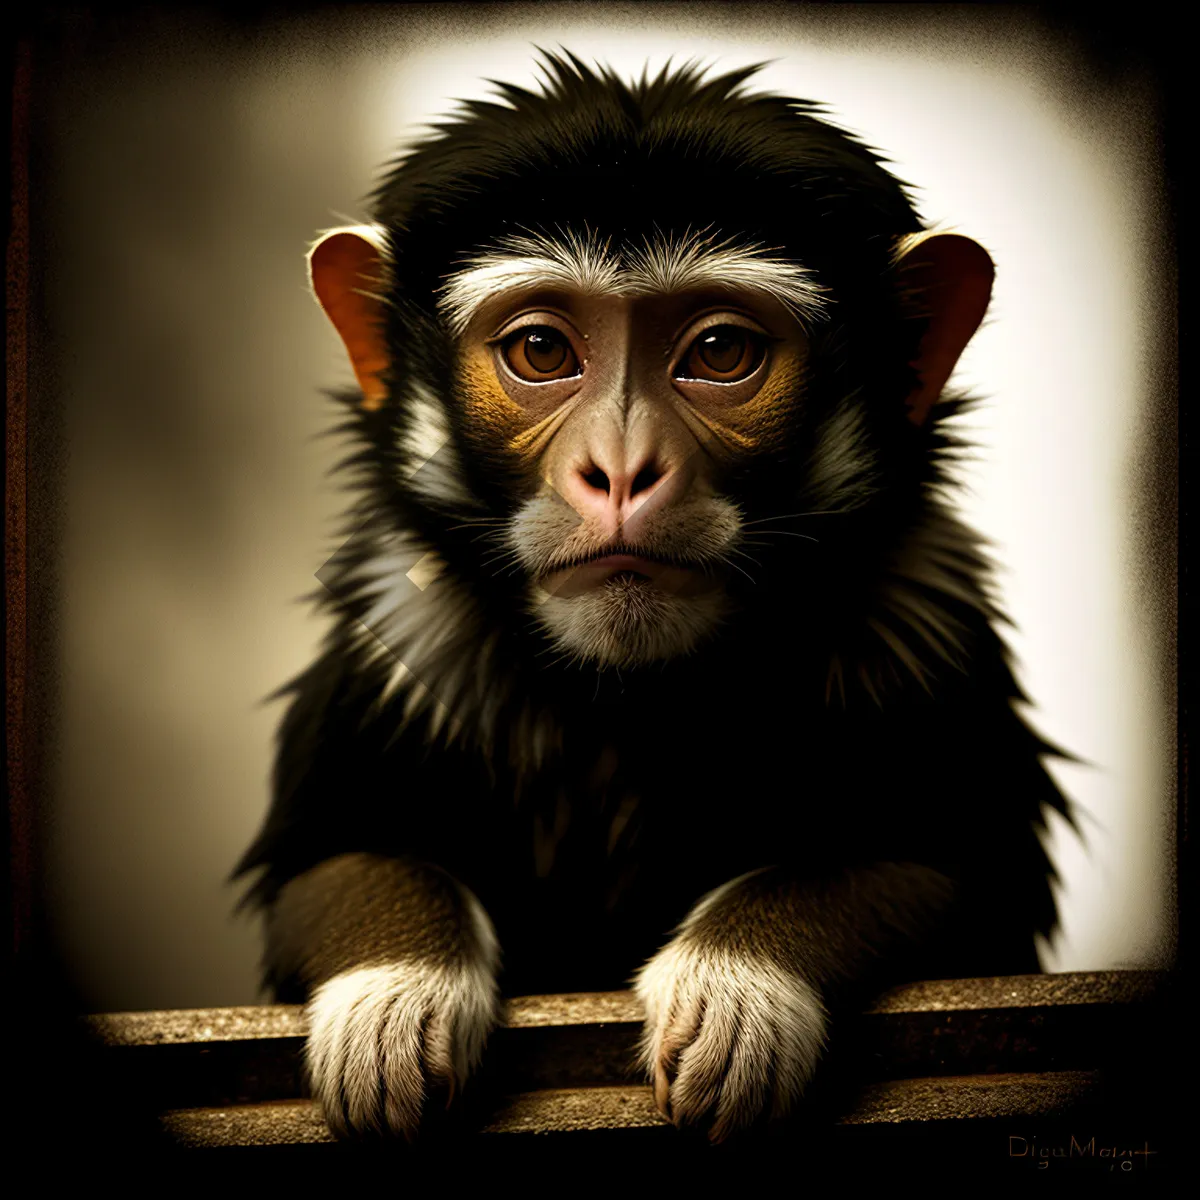 Picture of Adorable Wild Primate with Black Fur: Cute Monkey Portrait